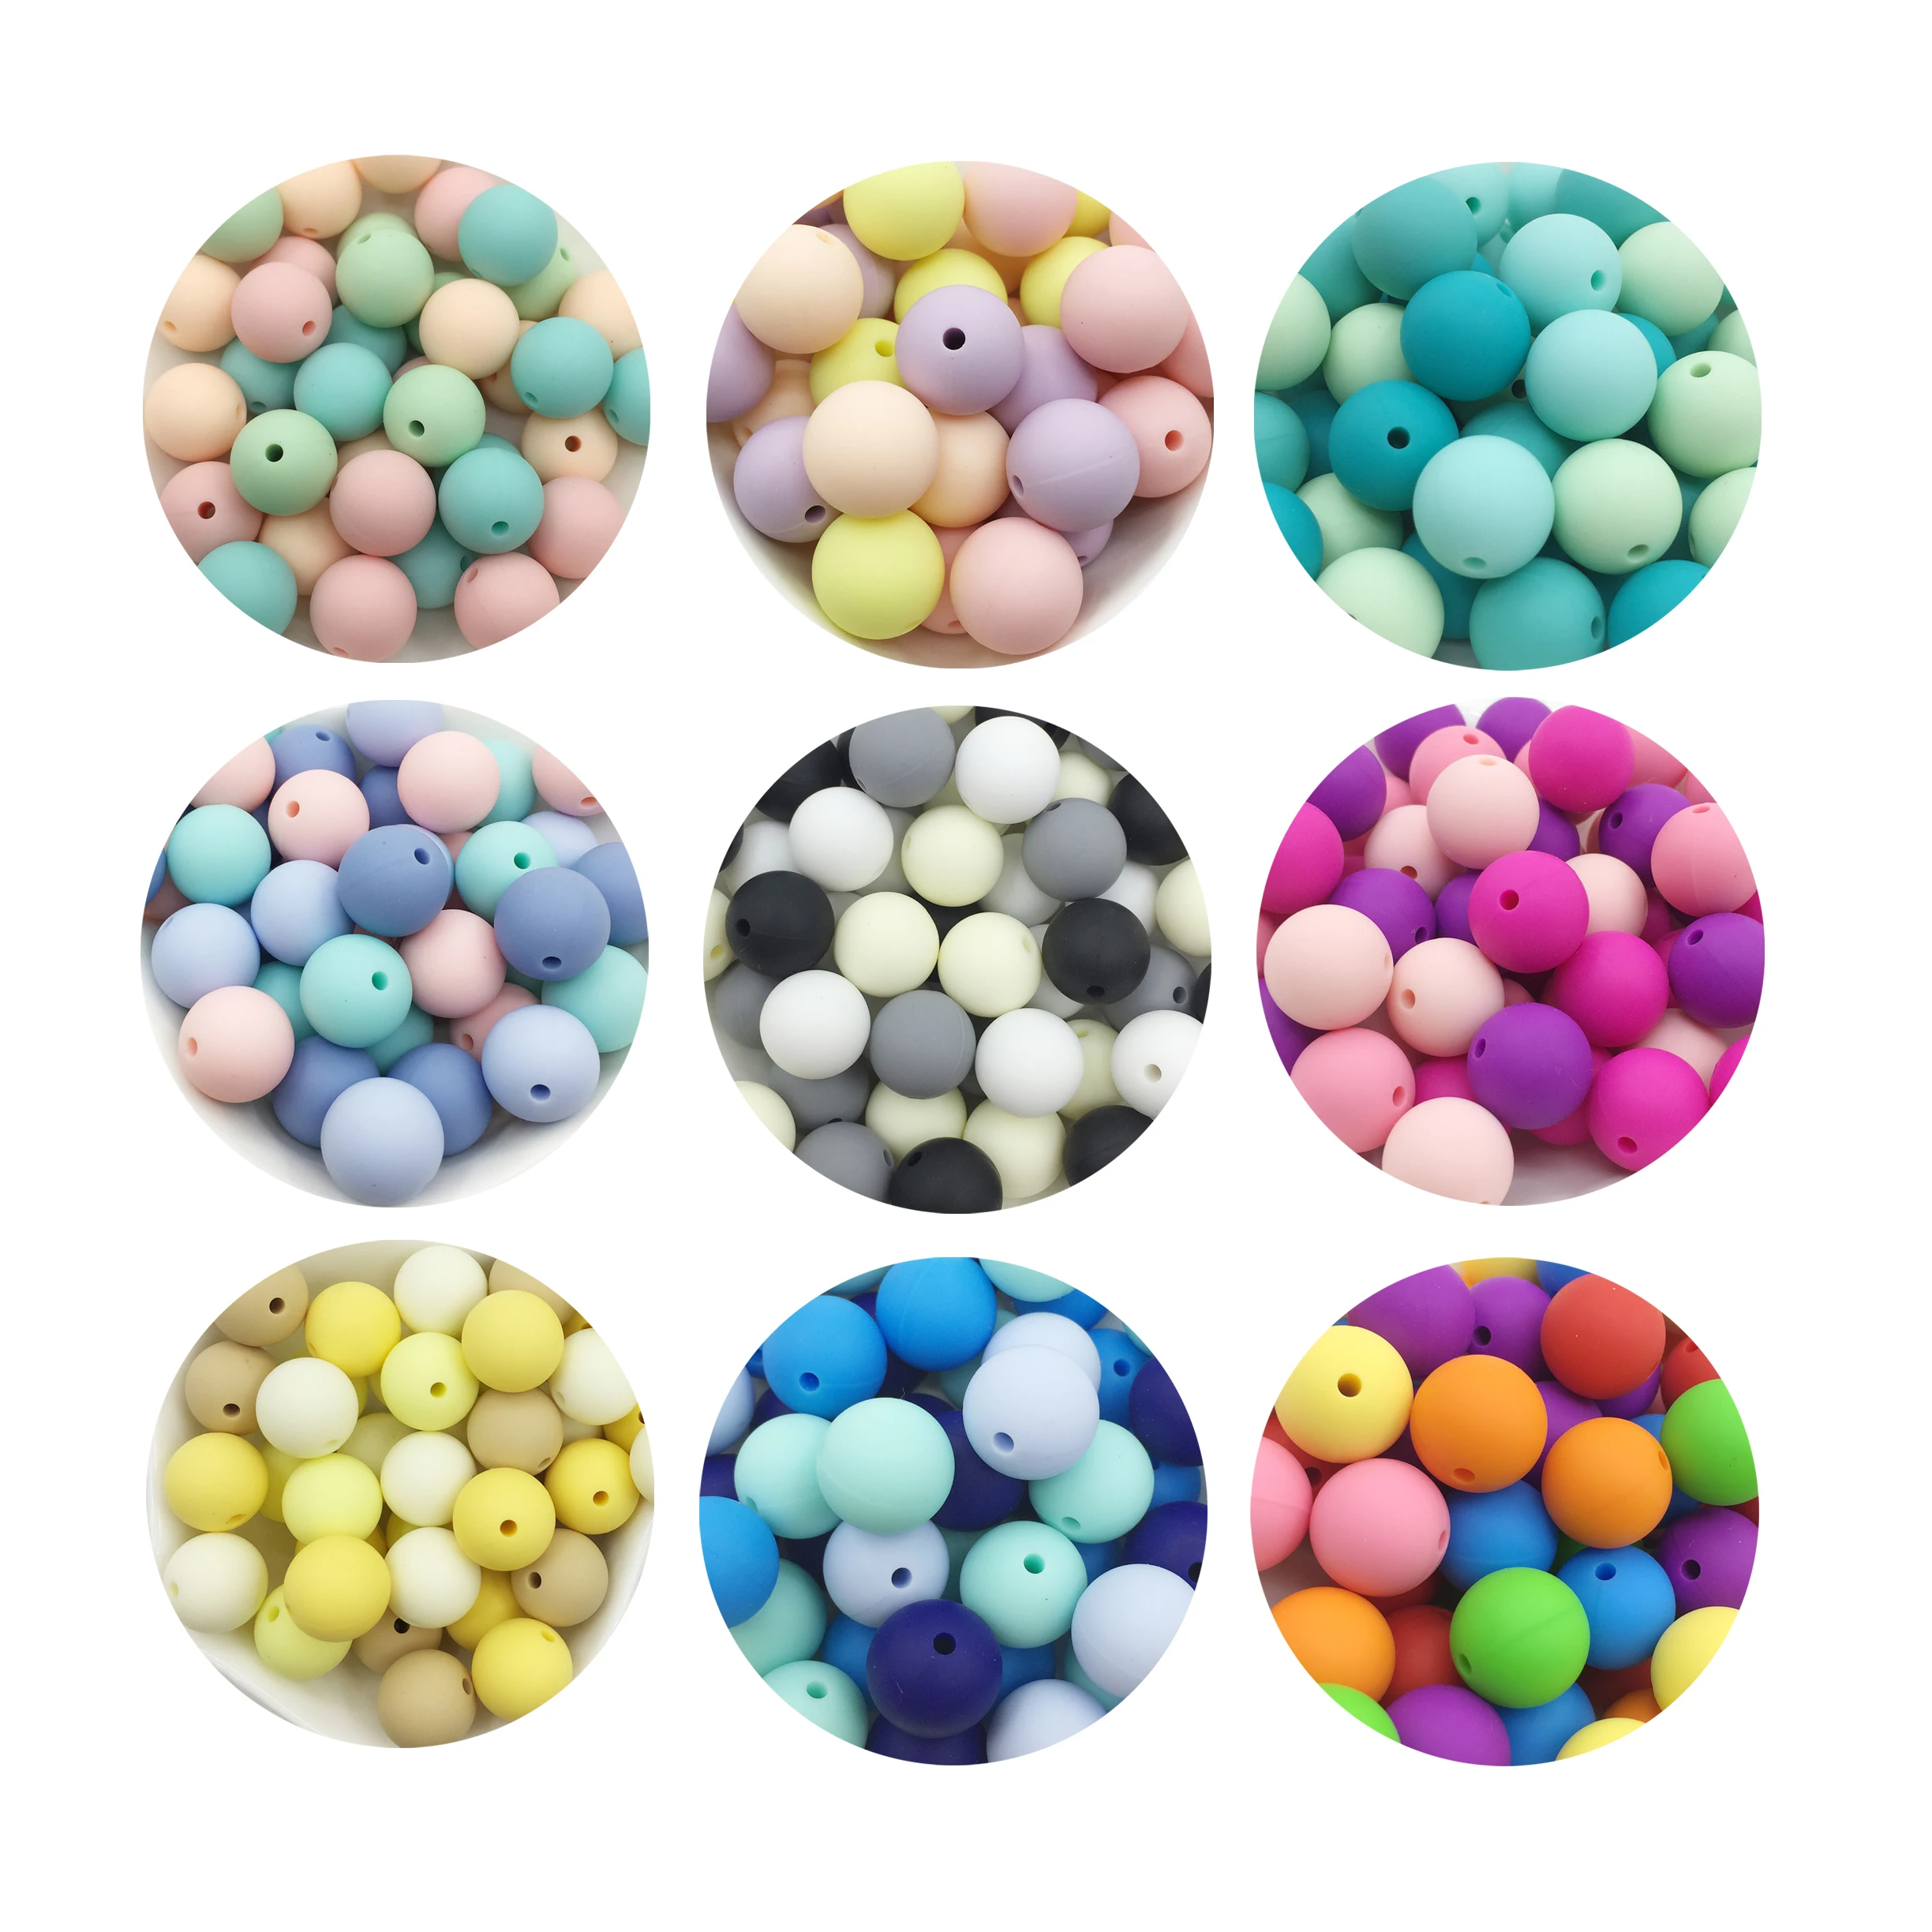 100pcs Silicone Beads Teething Necklace Baby DIY Safe Nursing Bead Multicolor 